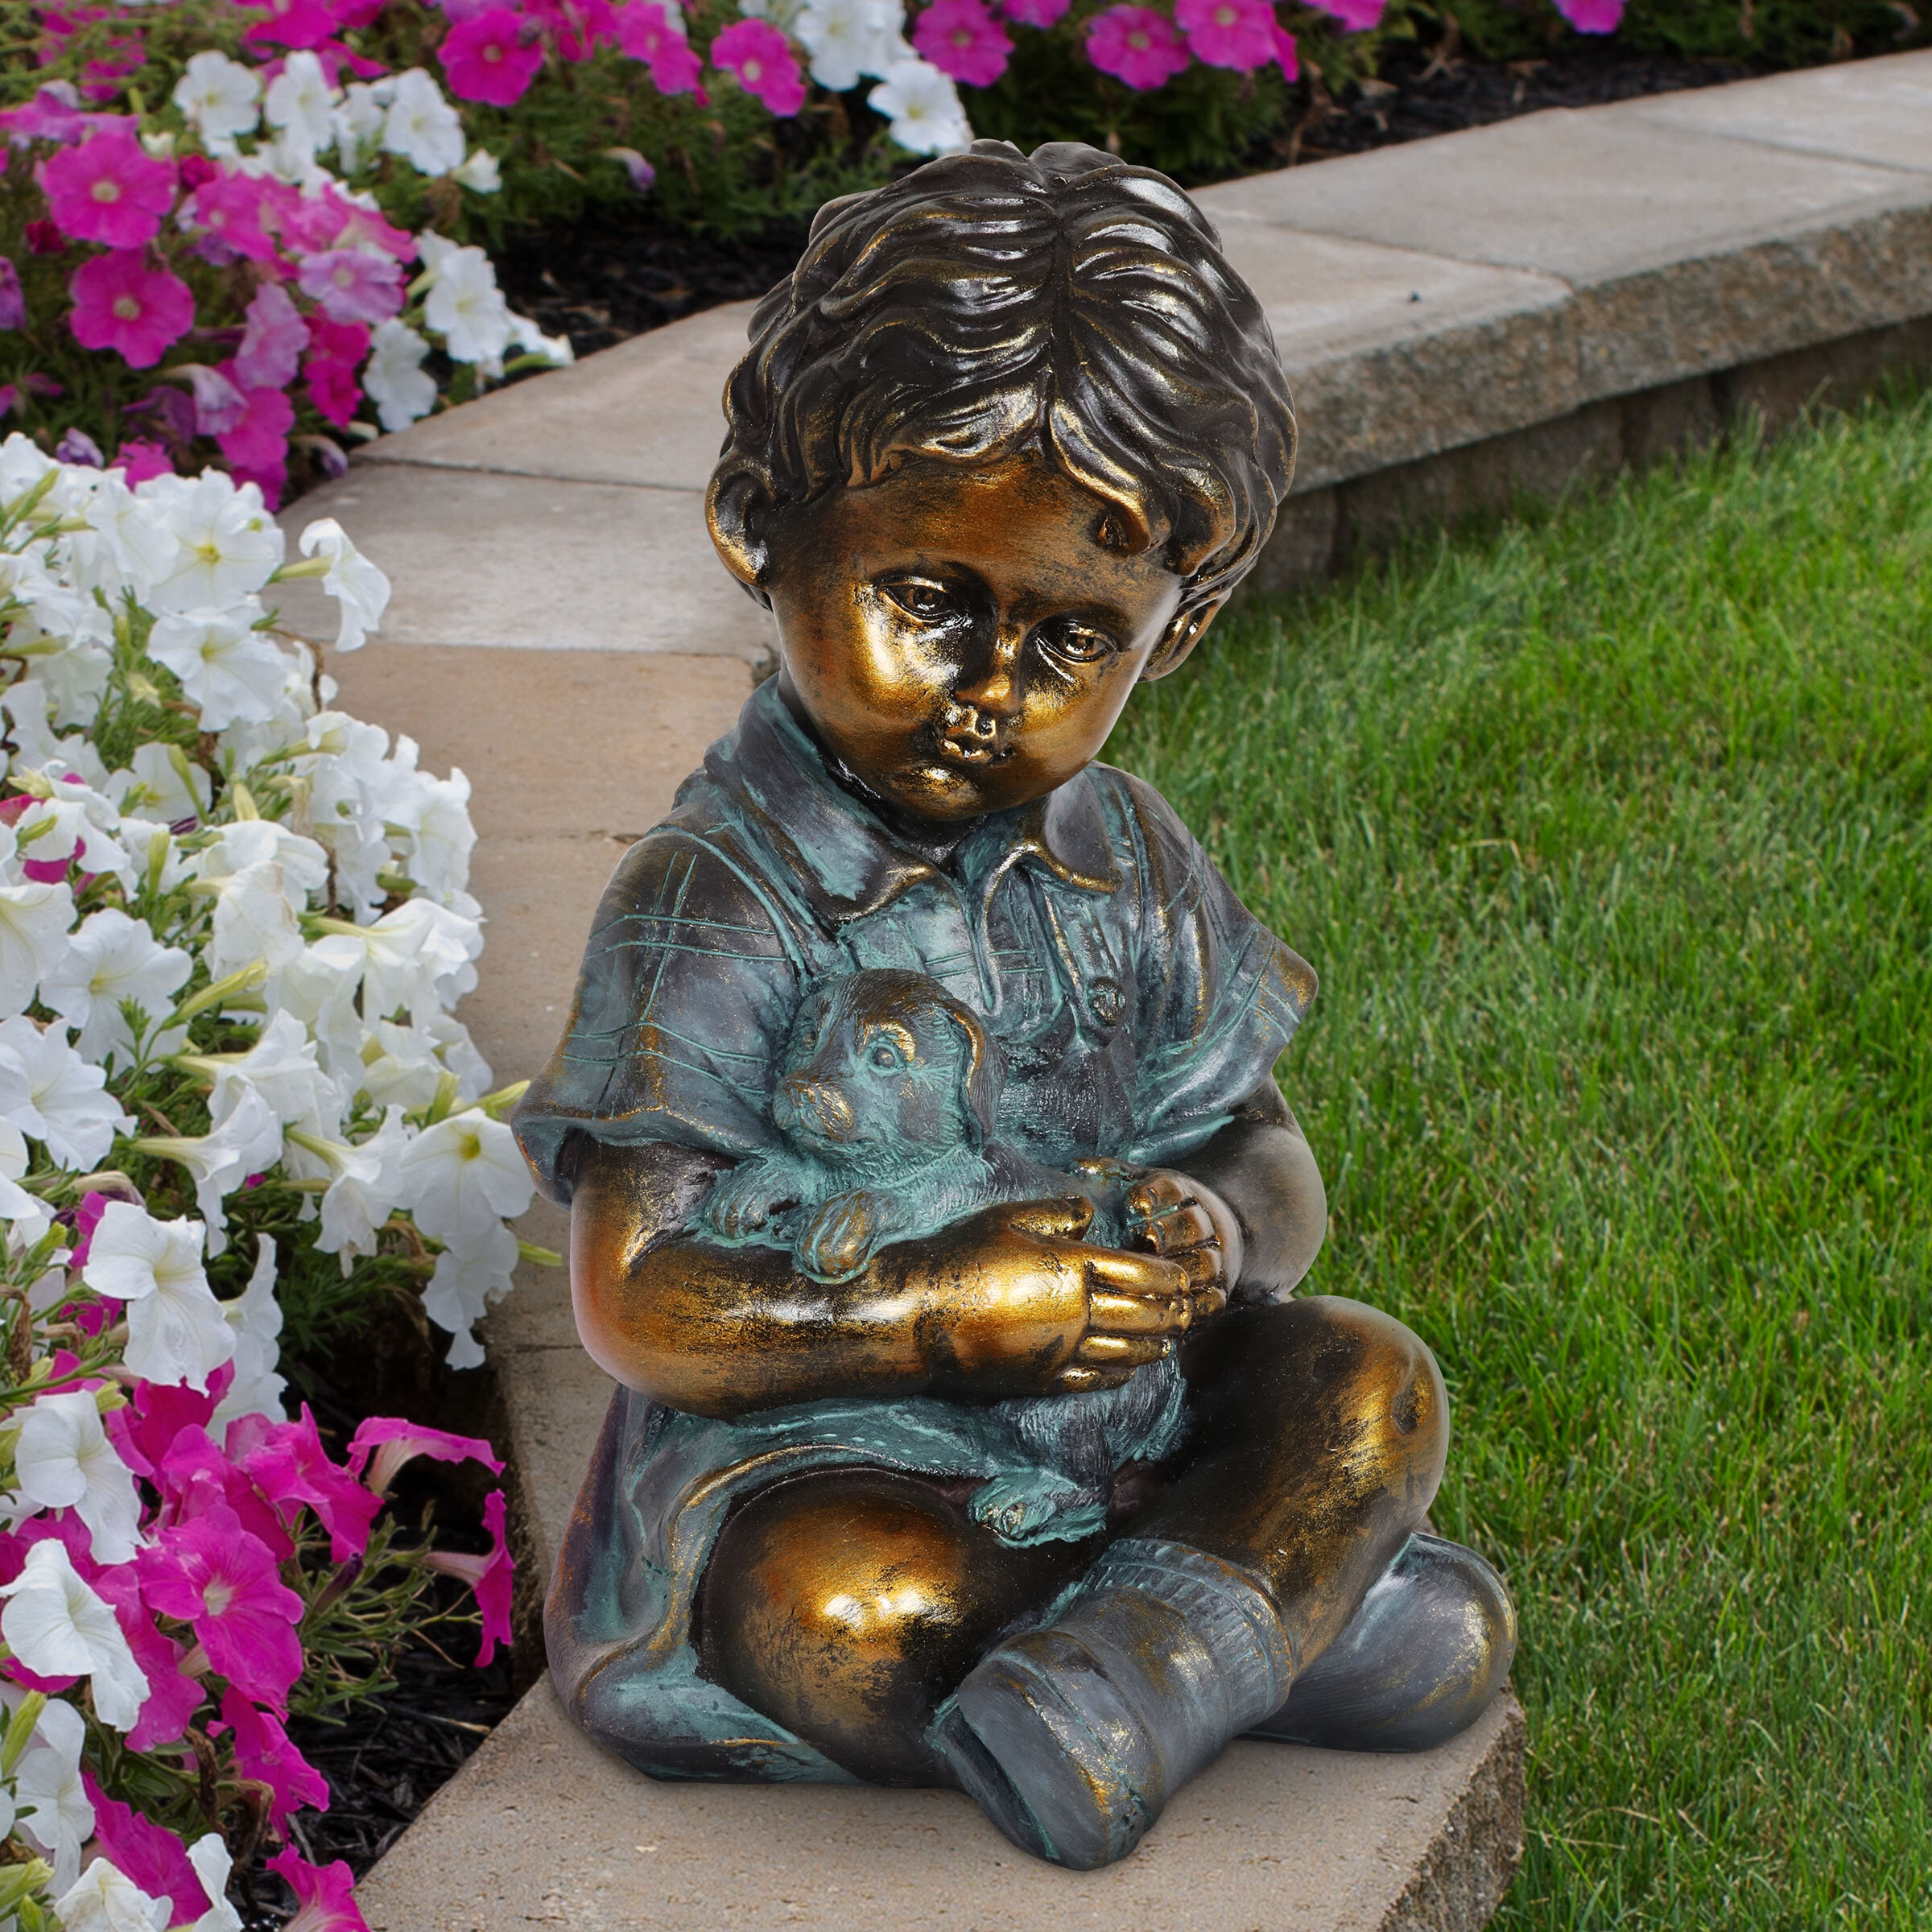 17x13x16 Bronze Colour Boy with Ball Sitting Garden Statue Suitable for Indoors or Outdoors